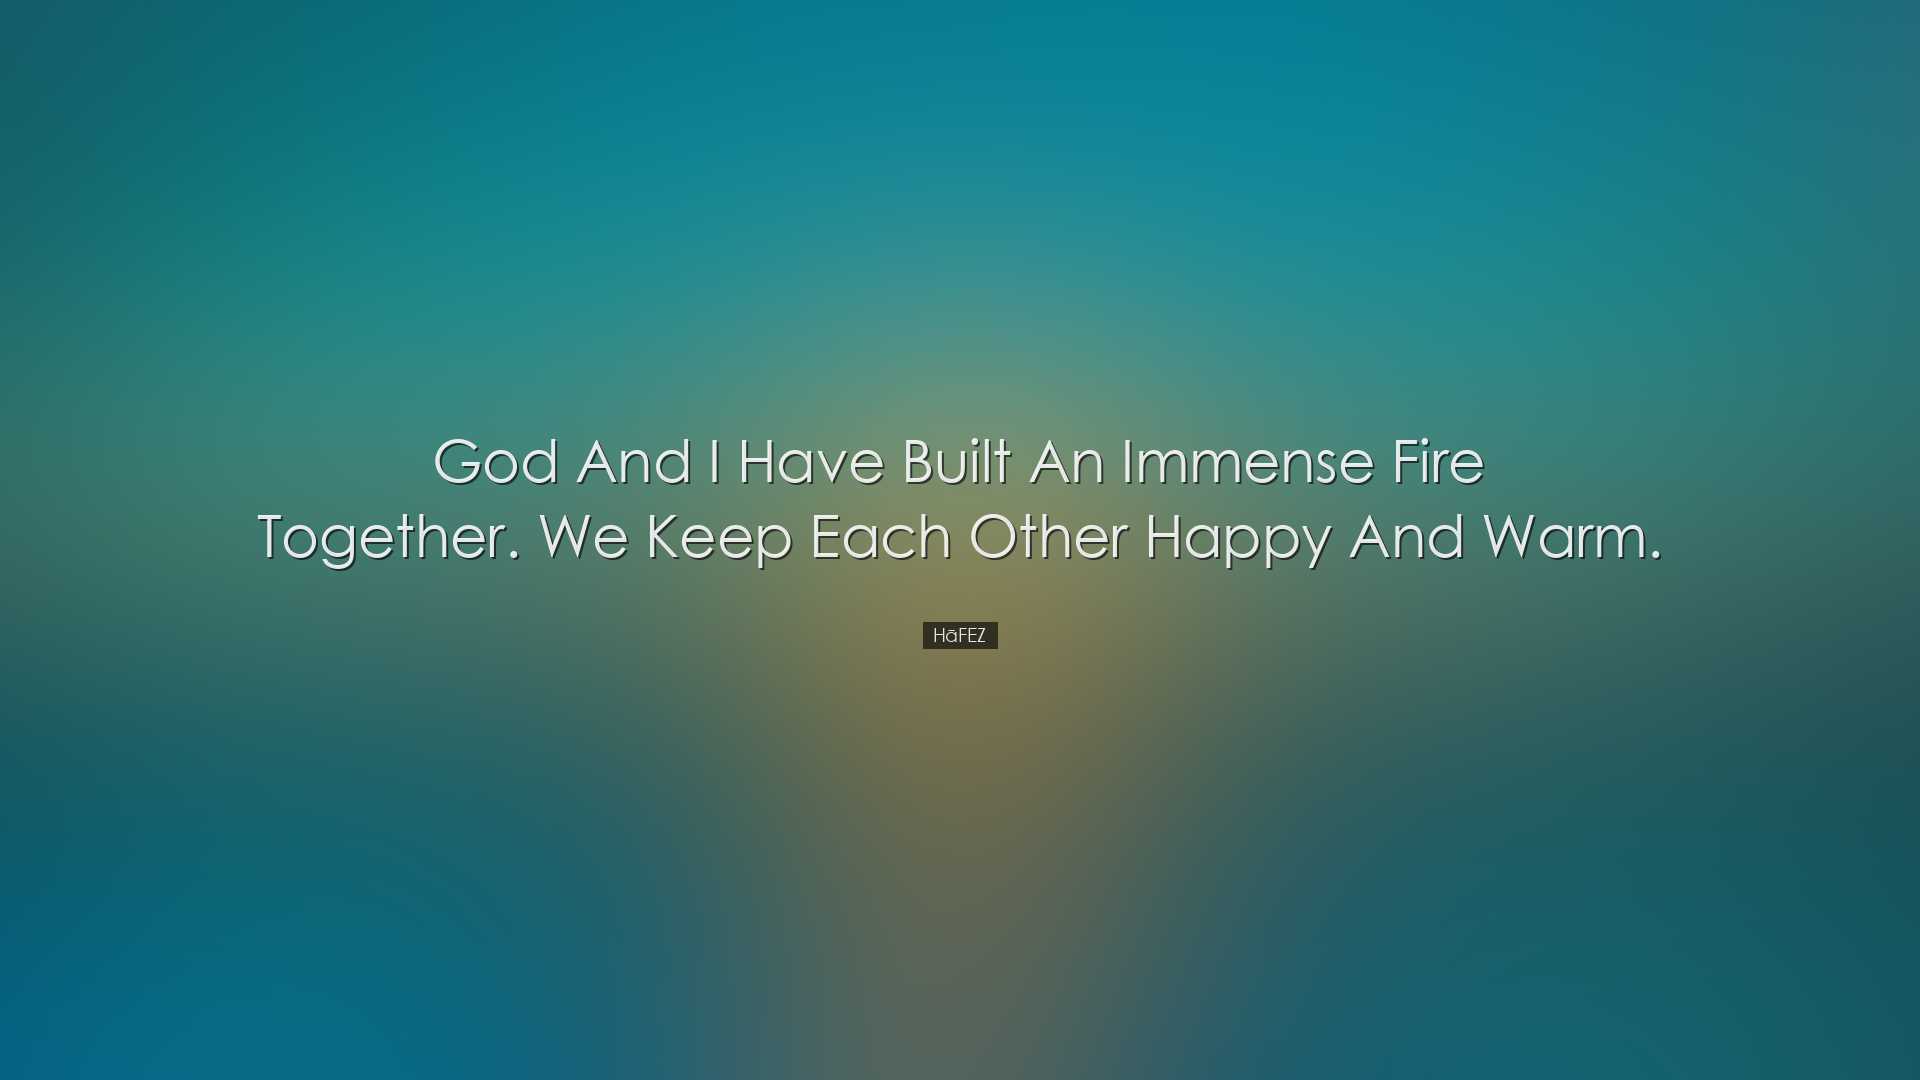 God and I have built an immense fire together. We keep each other